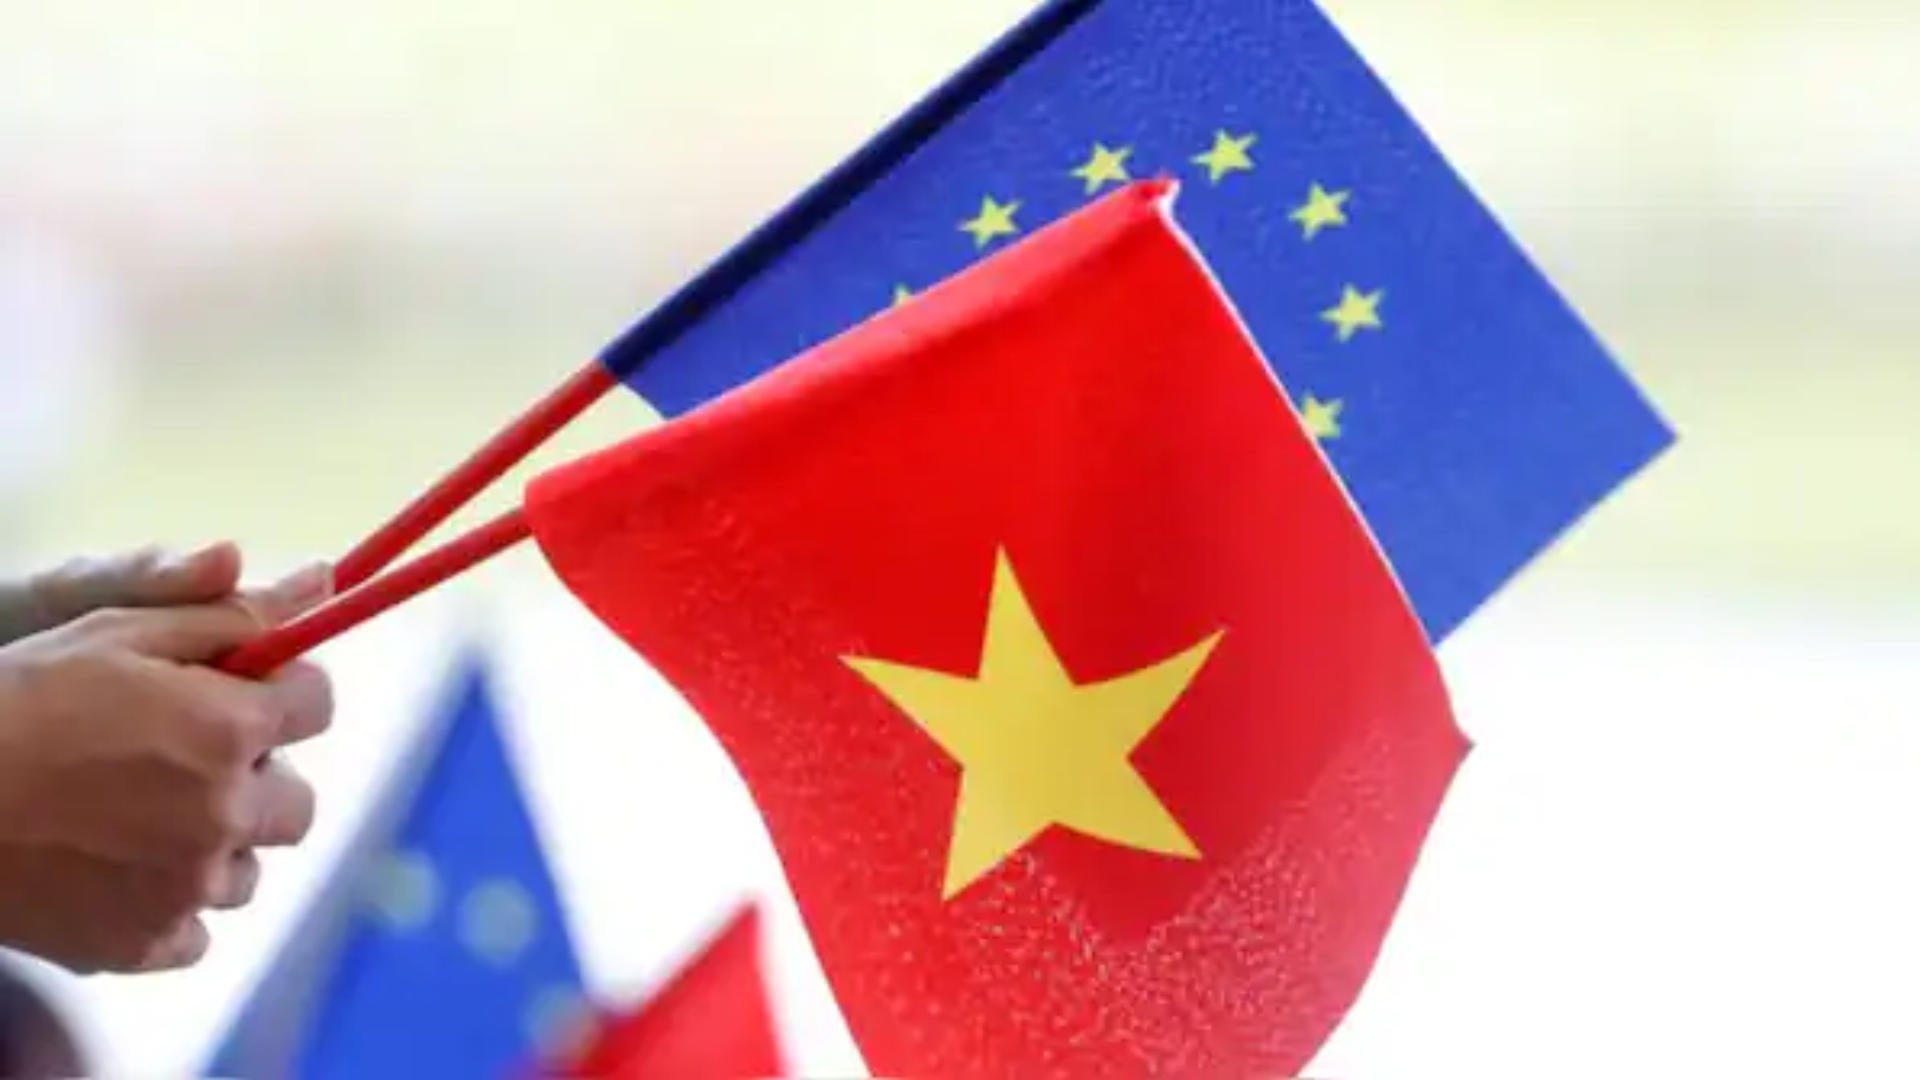 Is Vietnam's Delay in Meeting EU Official a Sign of Strained Relations over Russian Sanctions?